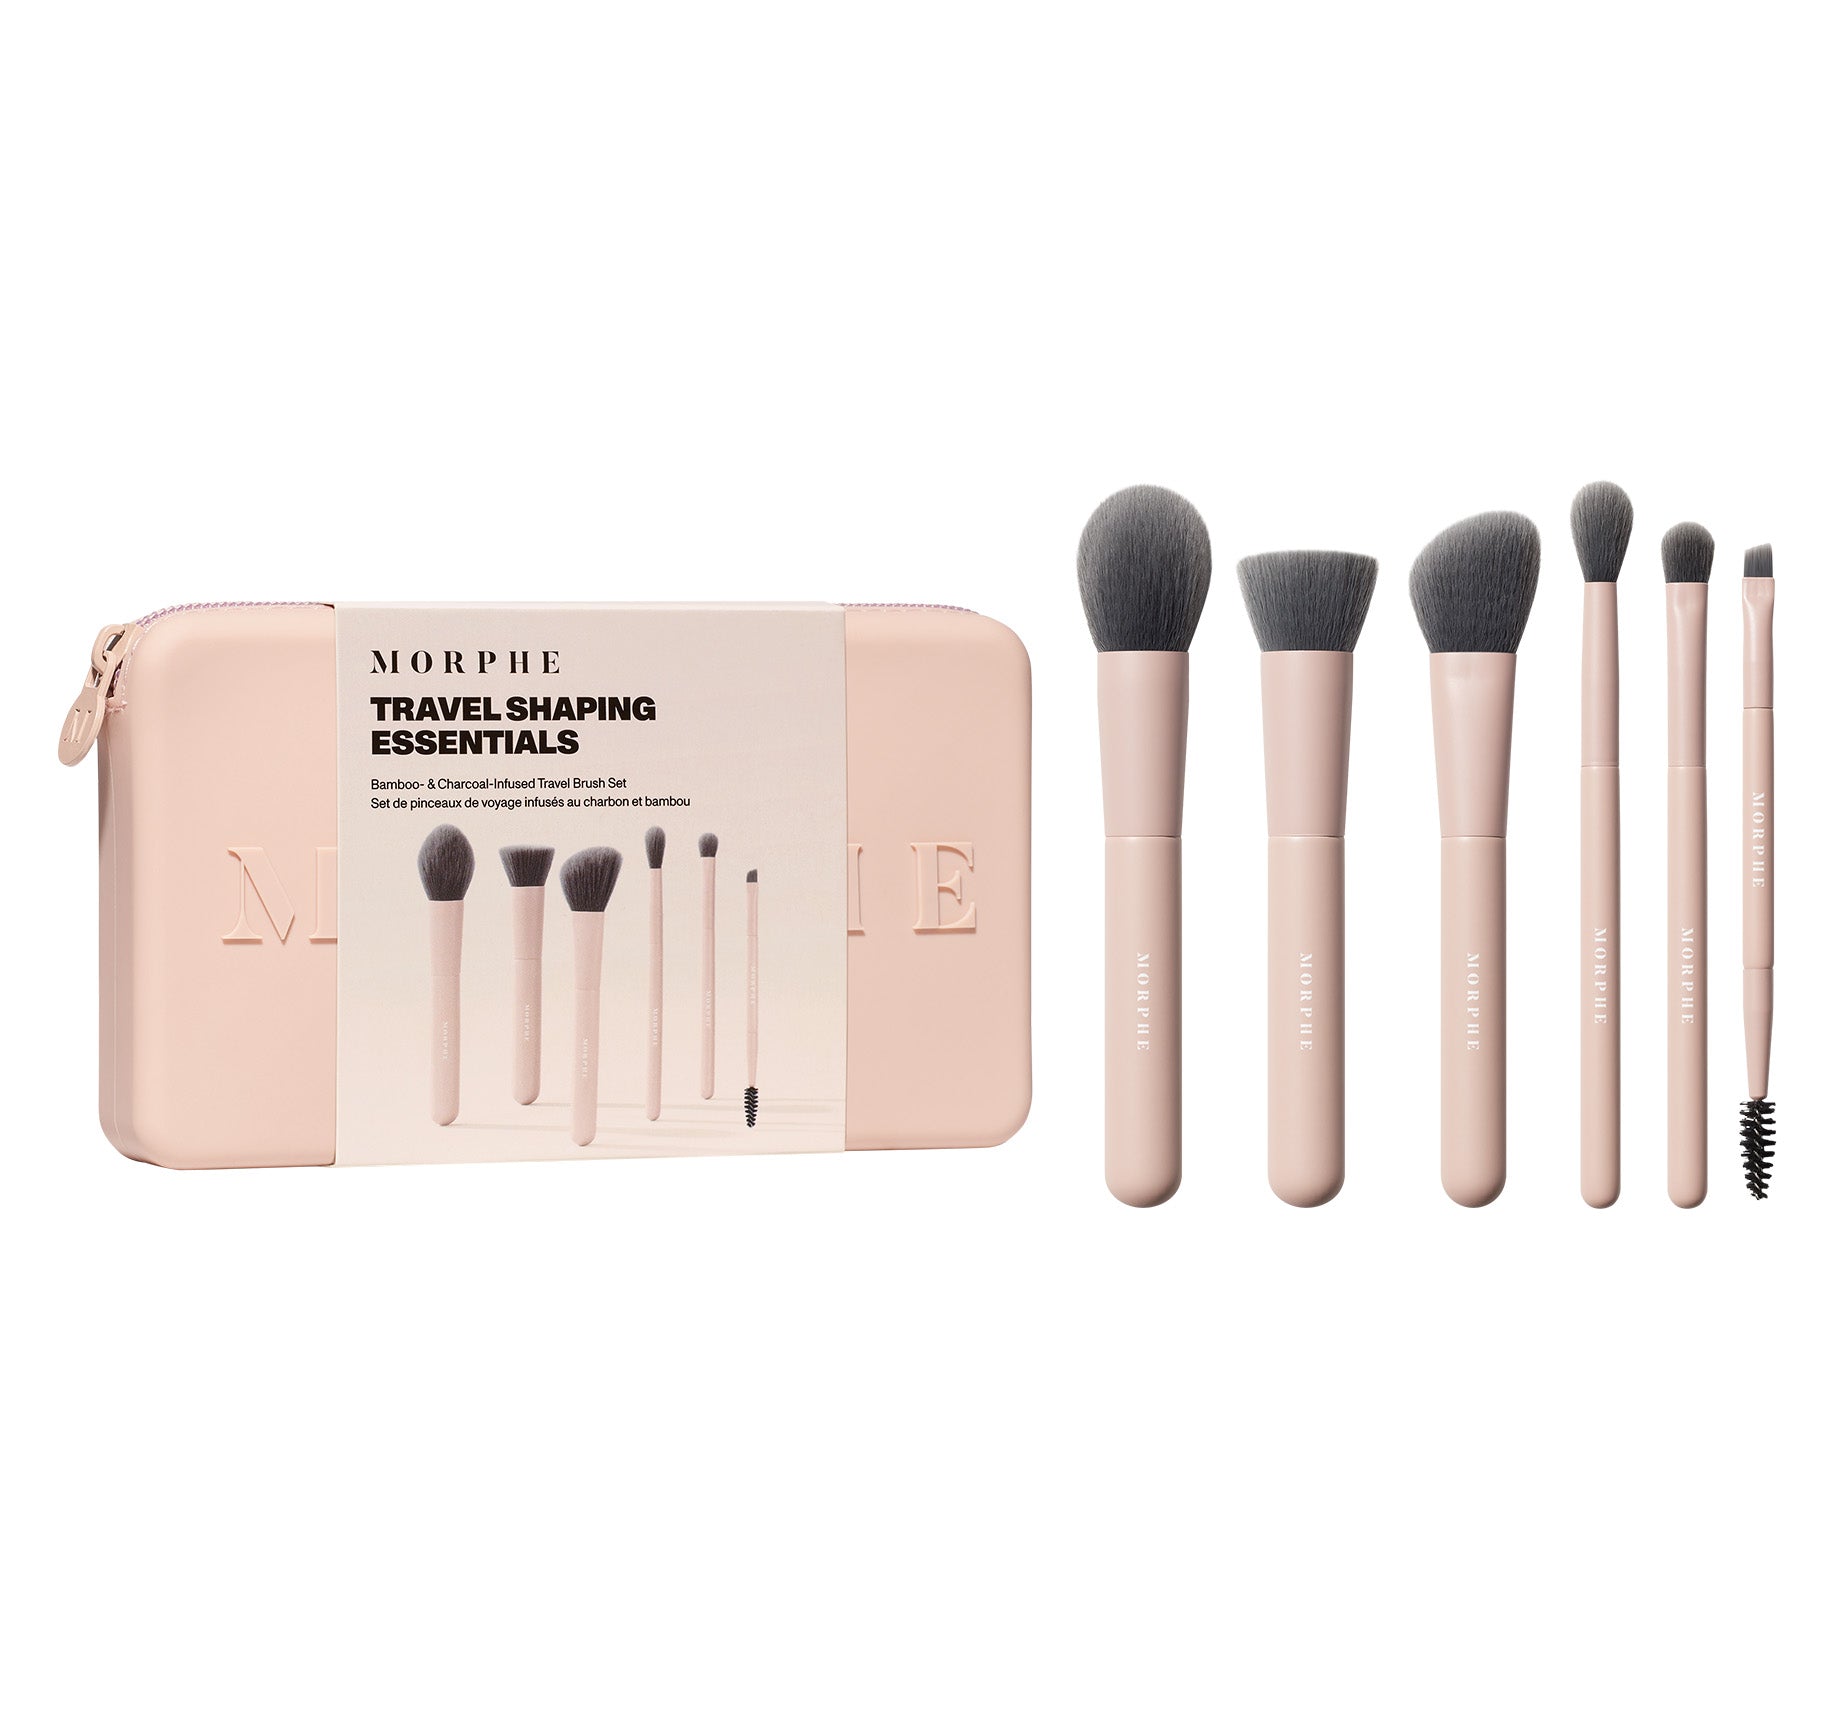 Travel Shaping Essentials Bamboo & Charcoal Infused Travel Brush Set - Image 1